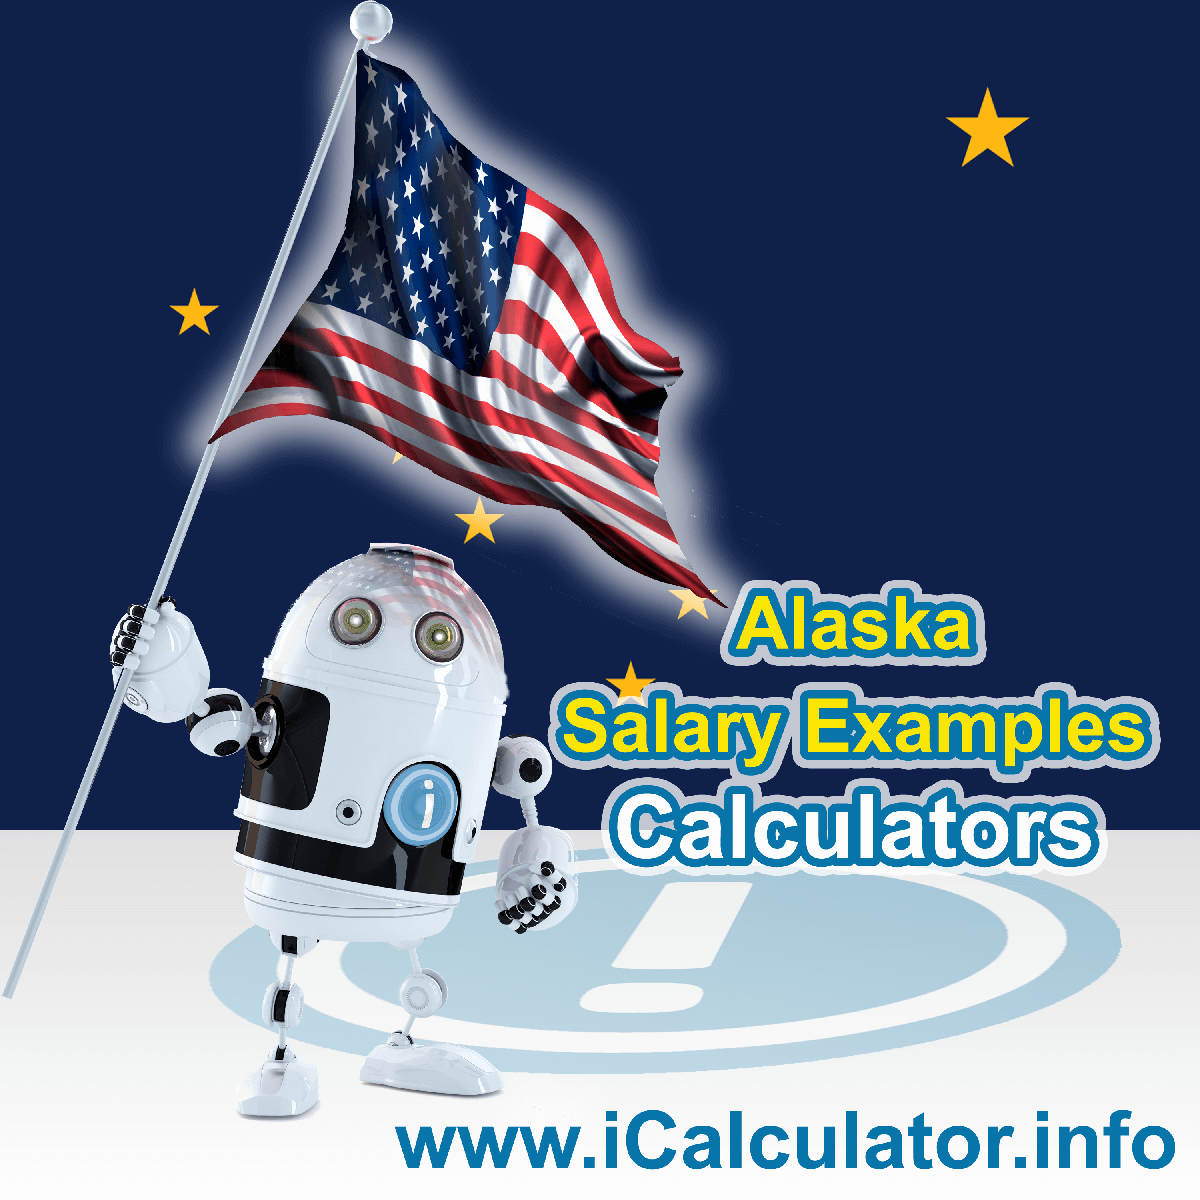 Alaska Salary Example for $ 75,000.00 in 2023 | iCalculator™ | $ 75,000.00 salary example for employee and employer paying Alaska State tincome taxes. Detailed salary after tax calculation including Alaska State Tax, Federal State Tax, Medicare Deductions, Social Security, Capital Gains and other income tax and salary deductions complete with supporting Alaska state tax tables 